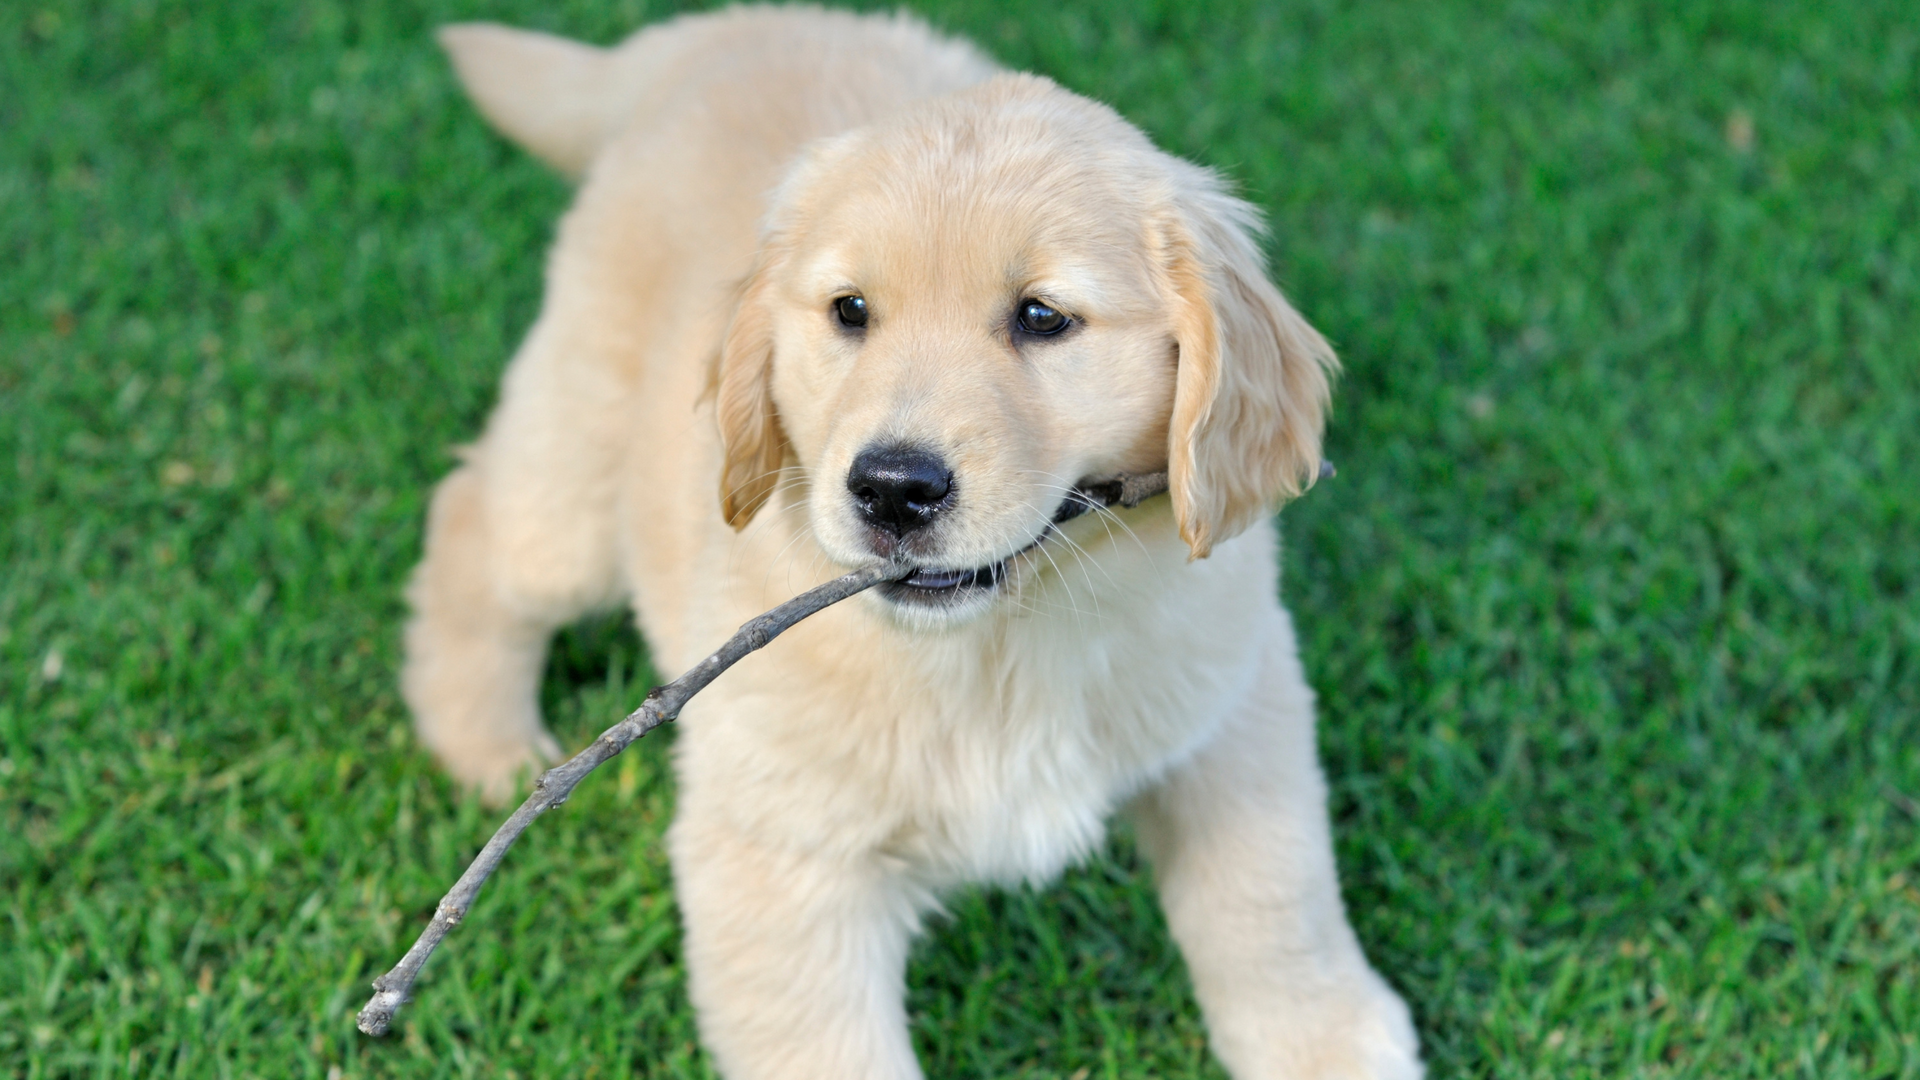 Adorable retriever pup playing on synthetic grass with stick.